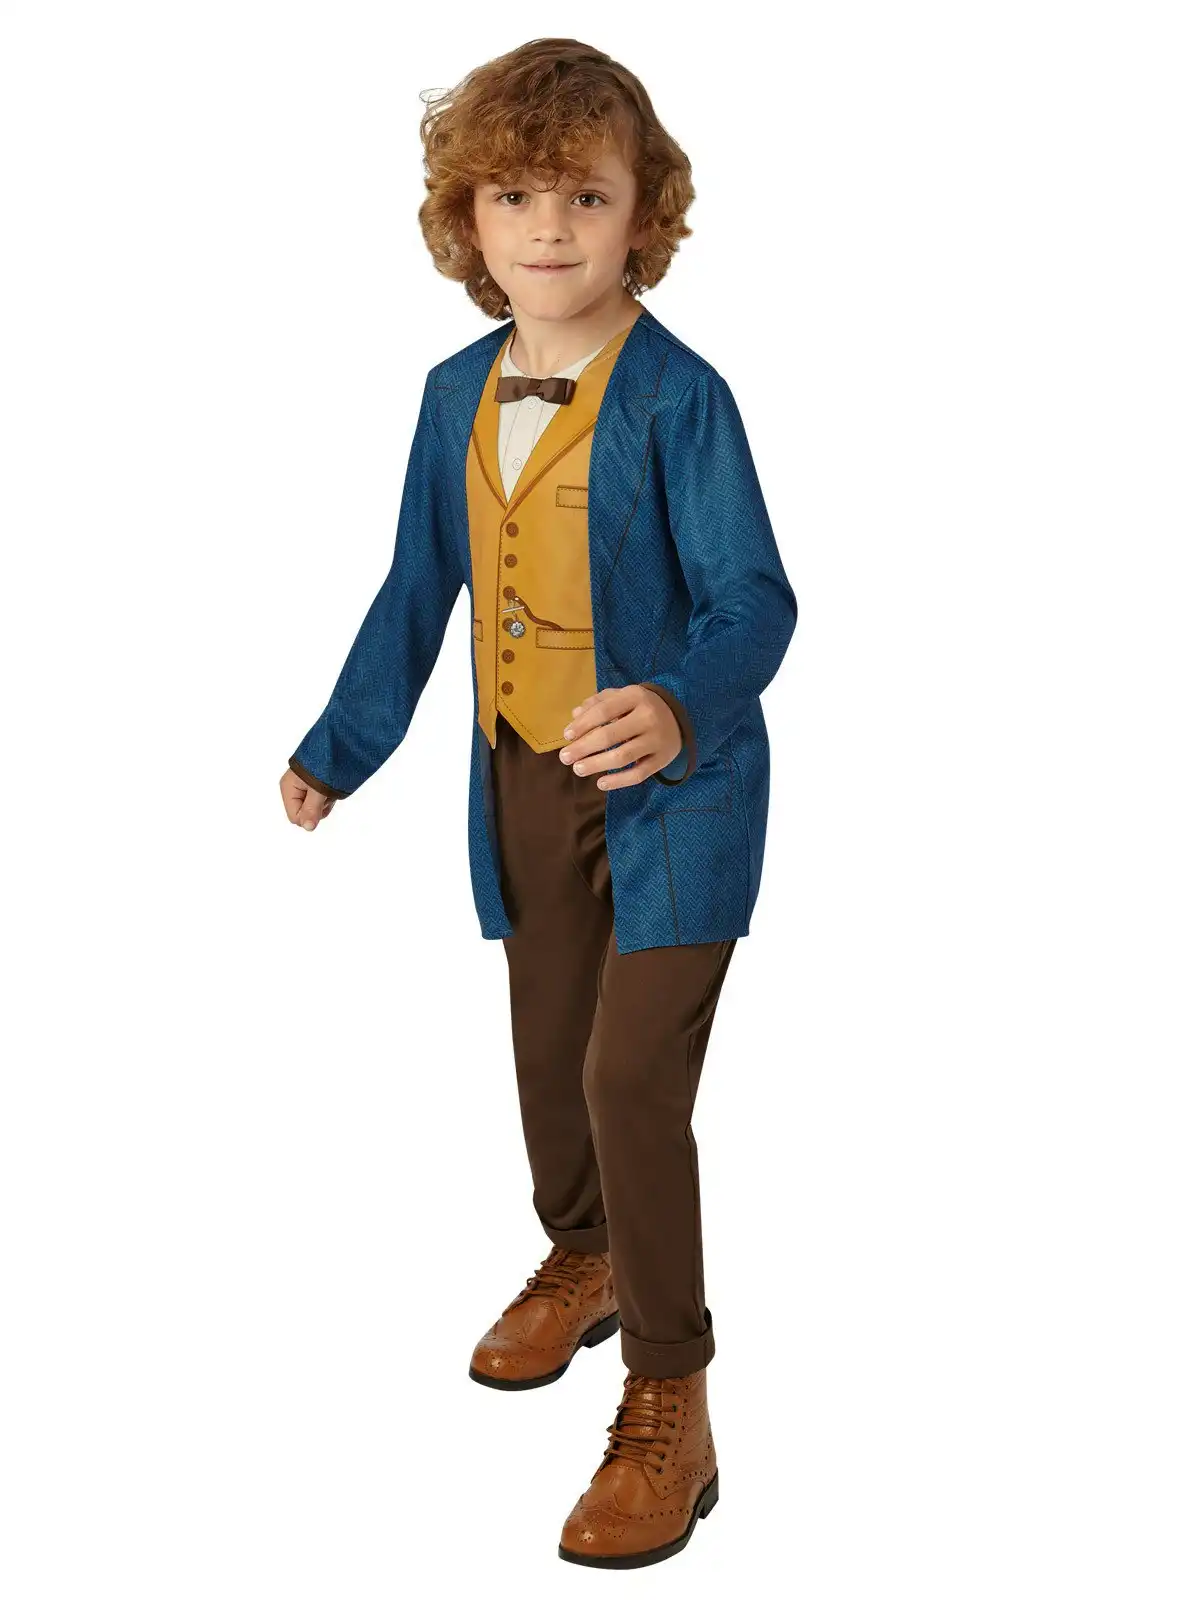 Harry Potter Newt Scamander Character Party Dress Up Costume Size 6 - 8yrs Kids